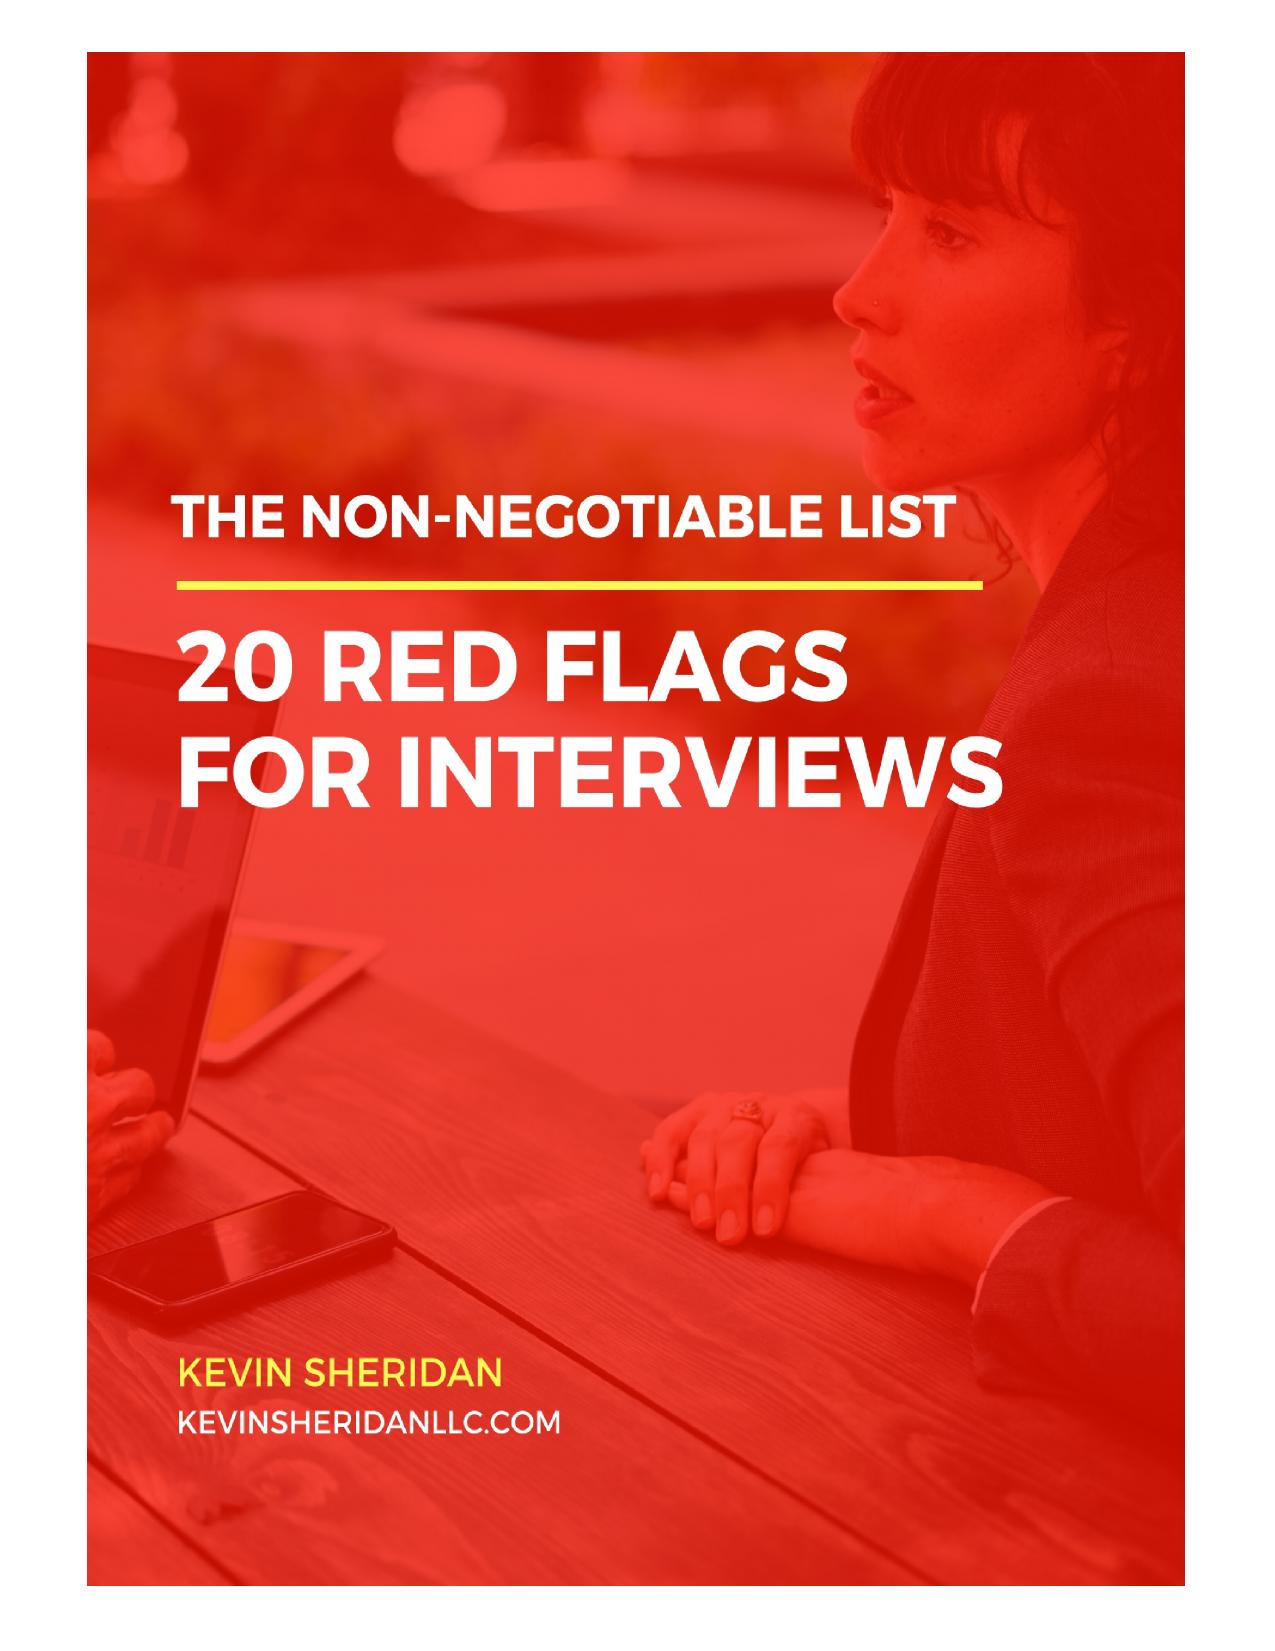 The Non-Negotialble List - 20 Red Flags for Interviews